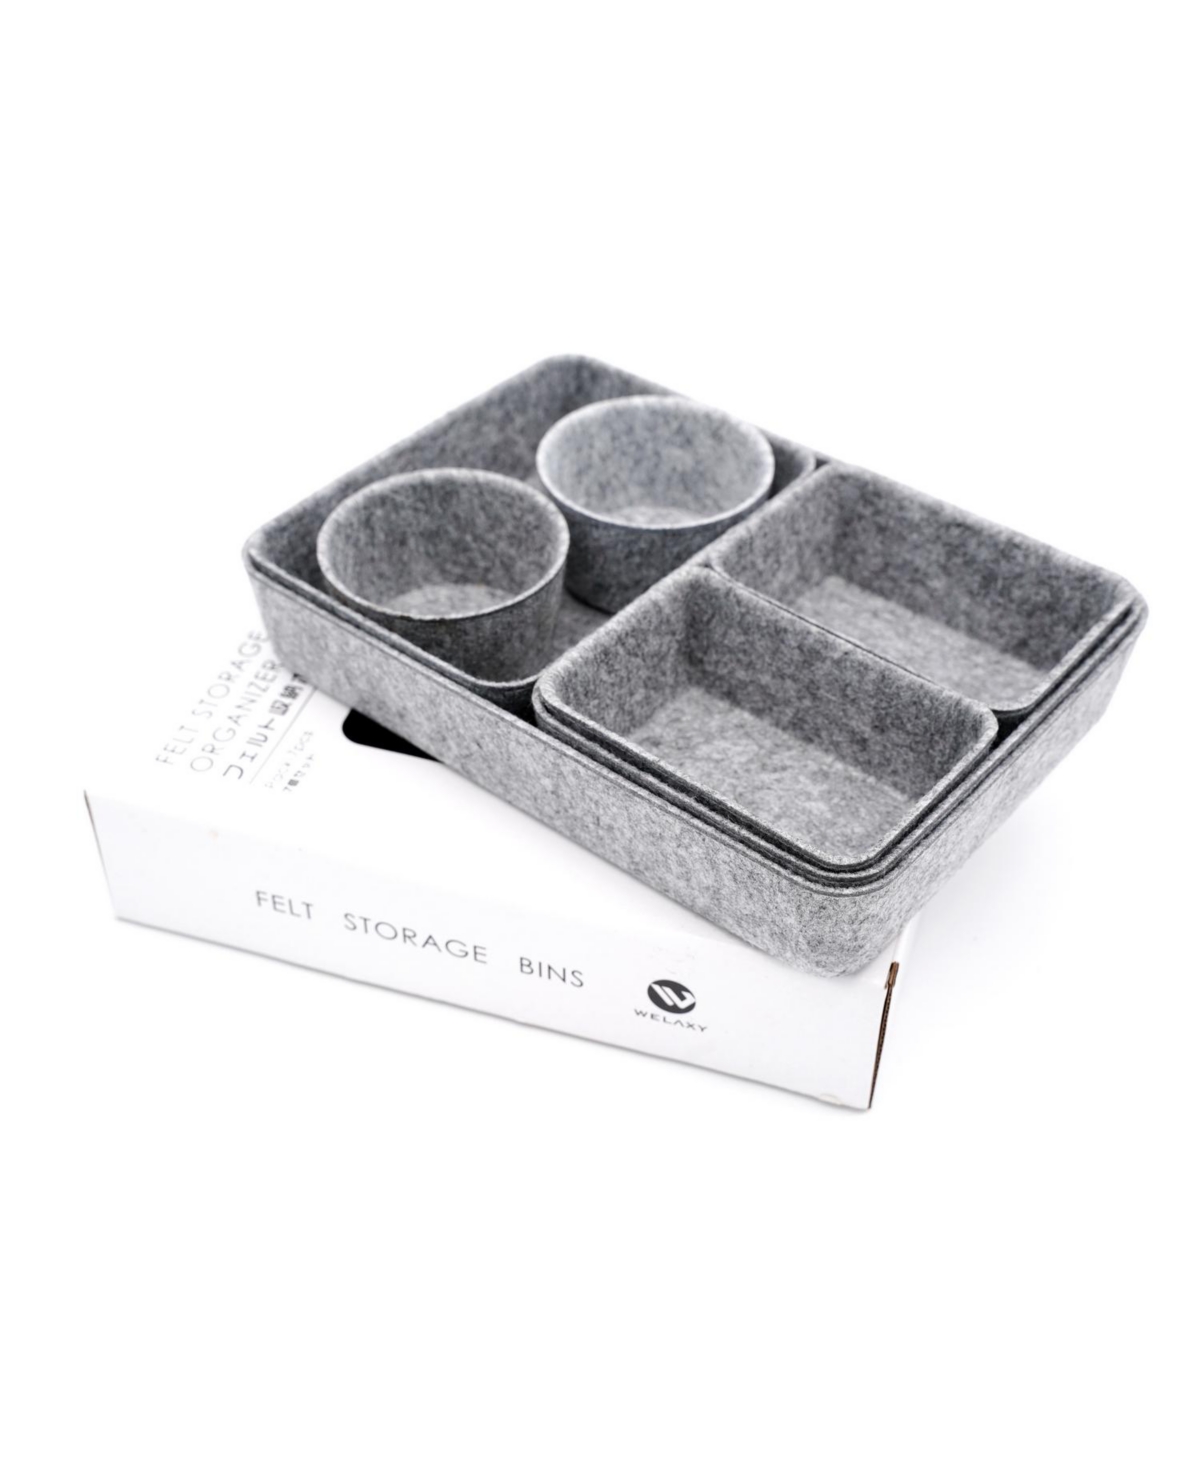 Welaxy 7 Piece Felt Drawer Organizer Set With Round Cups And Trays In Gray